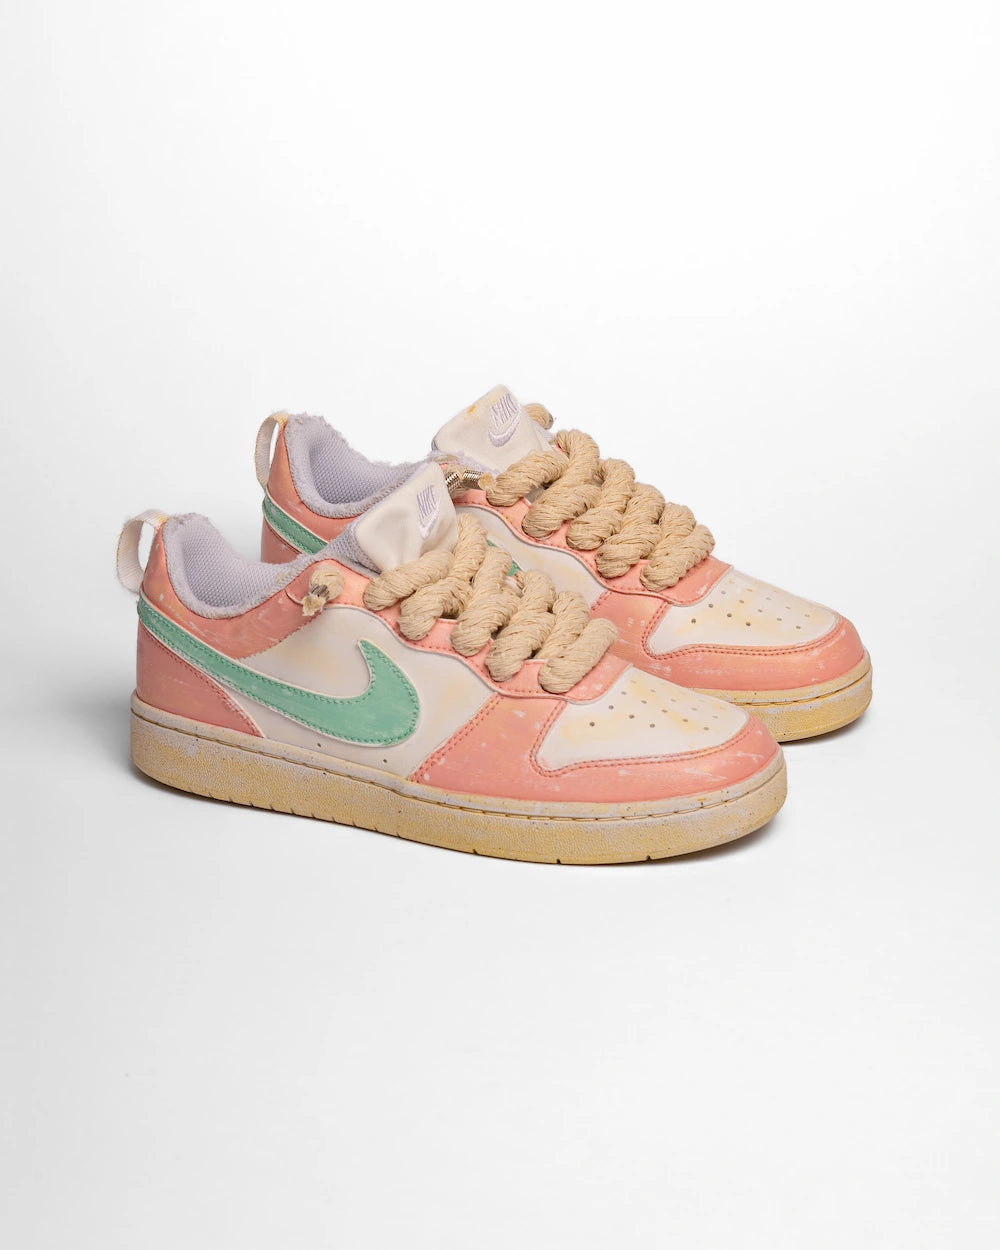 Nike borough donna Rope Vintage Pink/Mint con lacci in corda beige